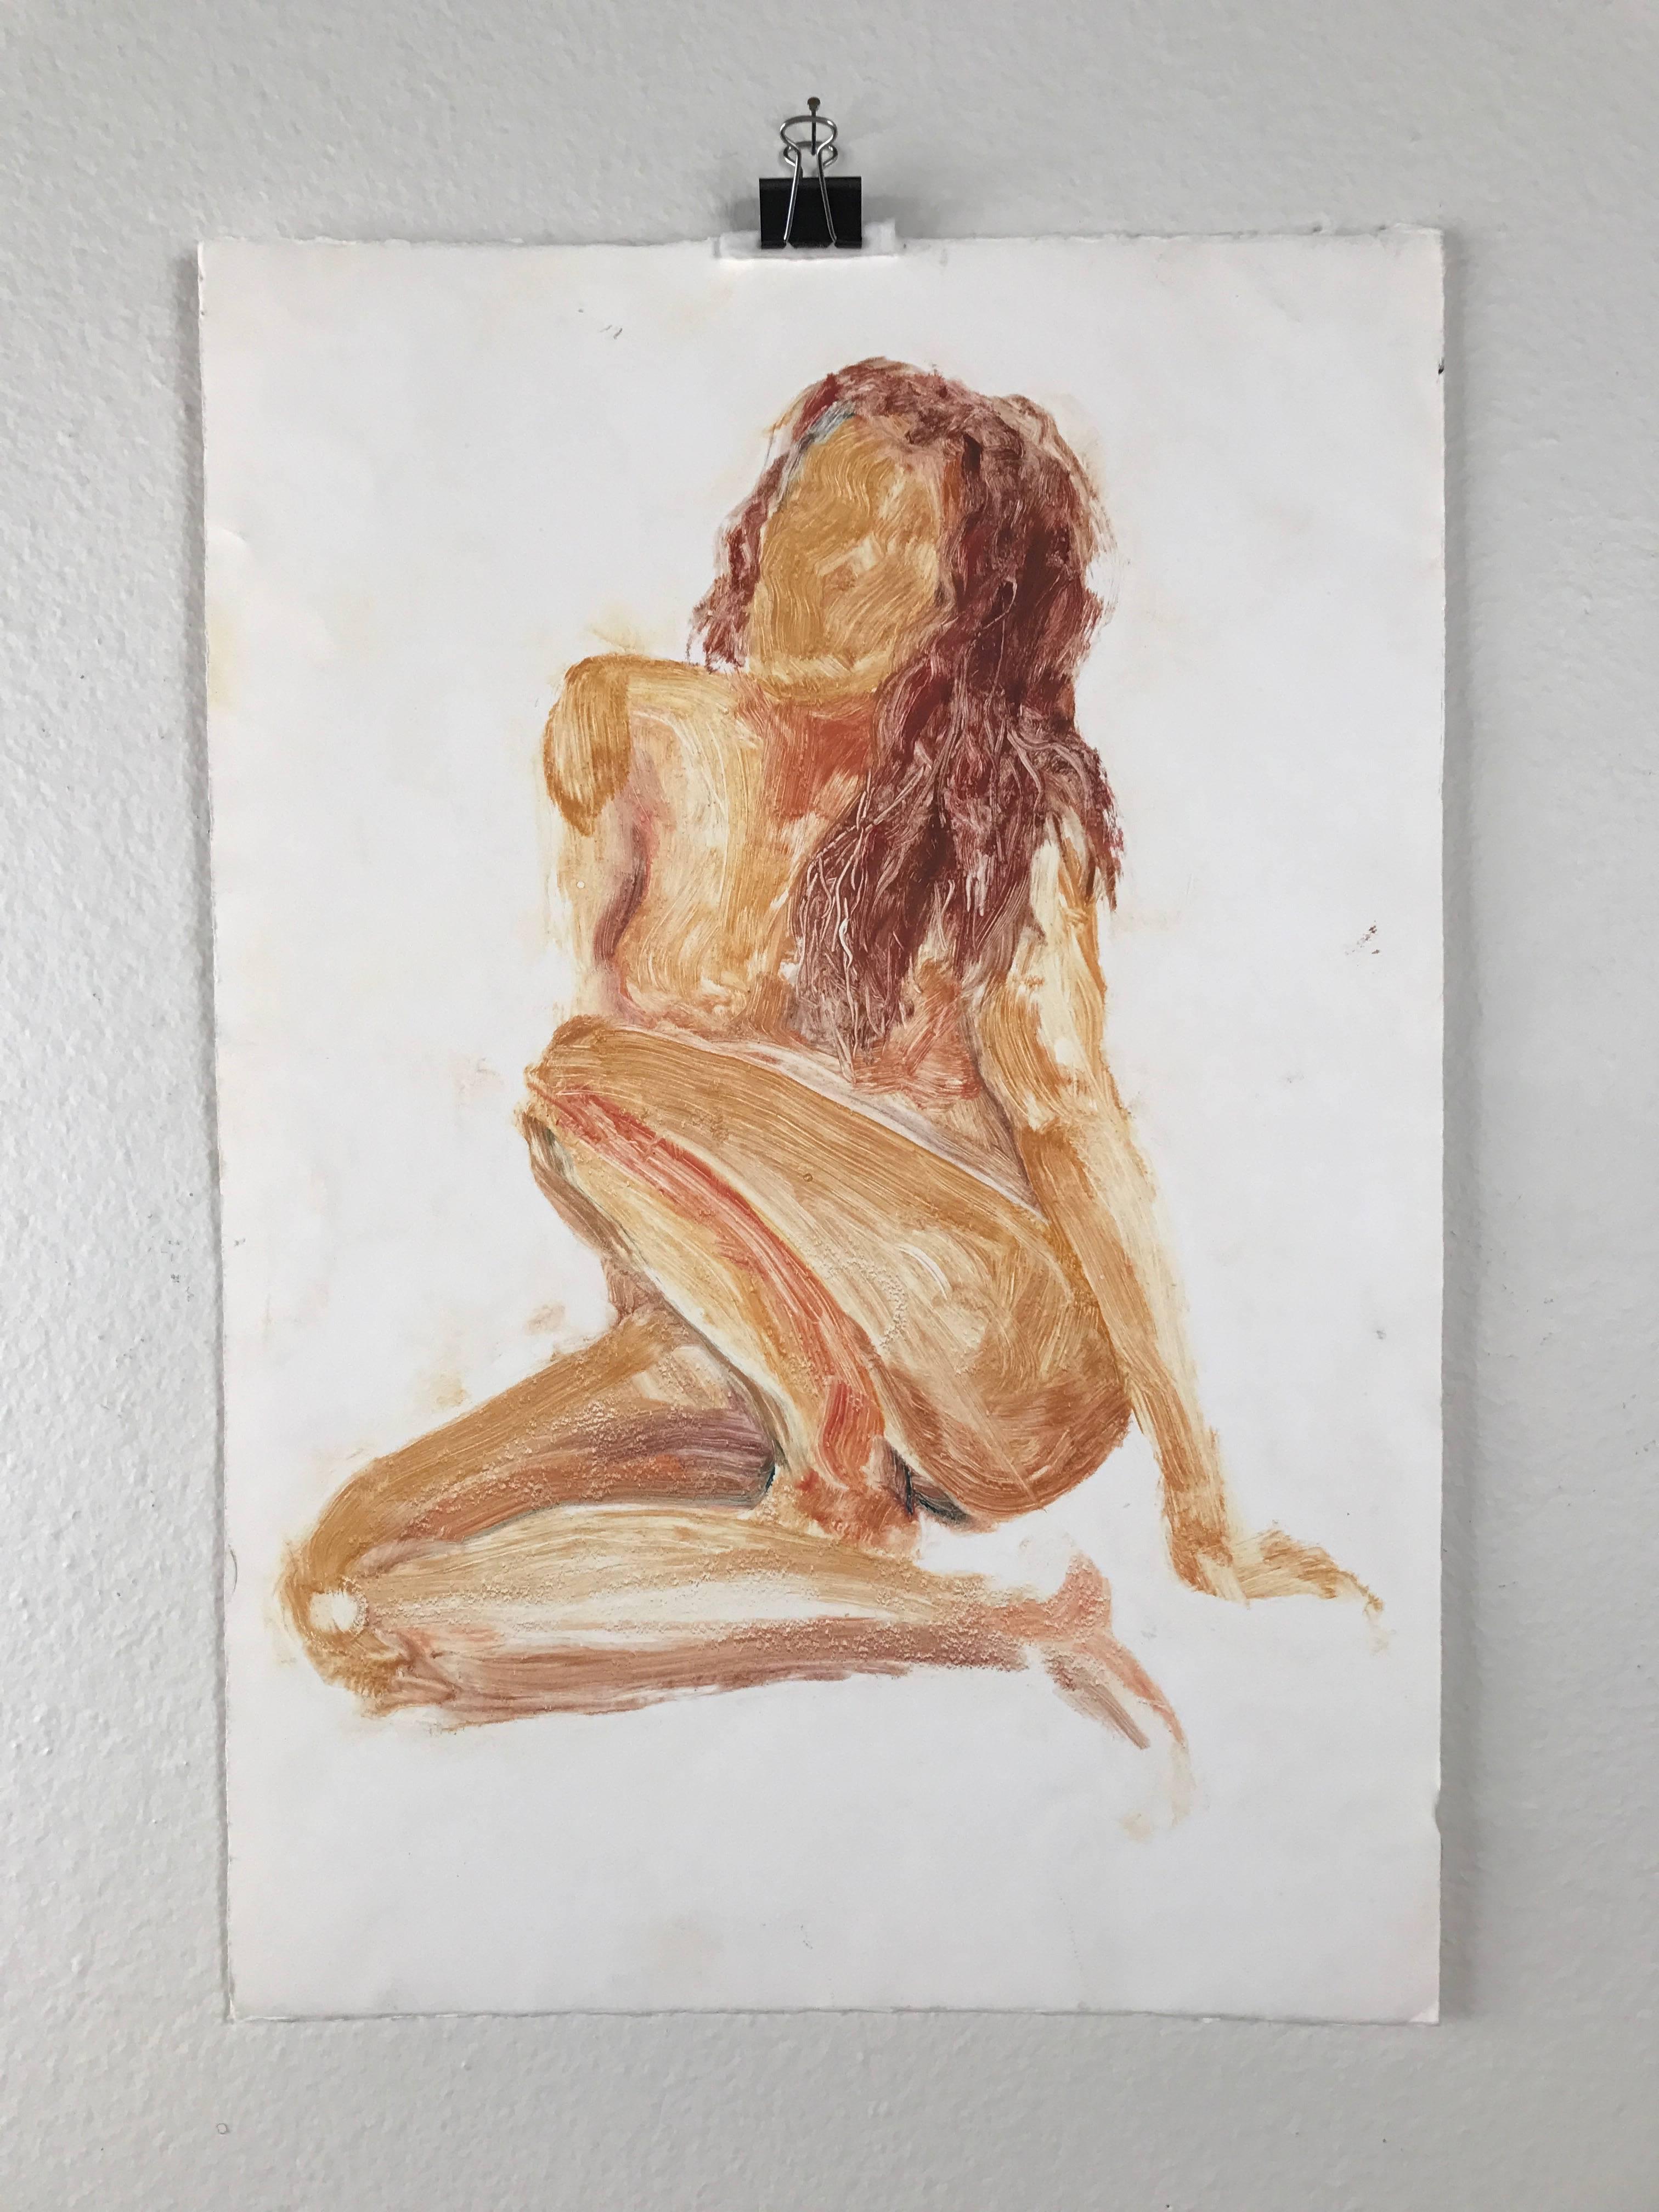 Sitting Nude - Print by Carolyn Young